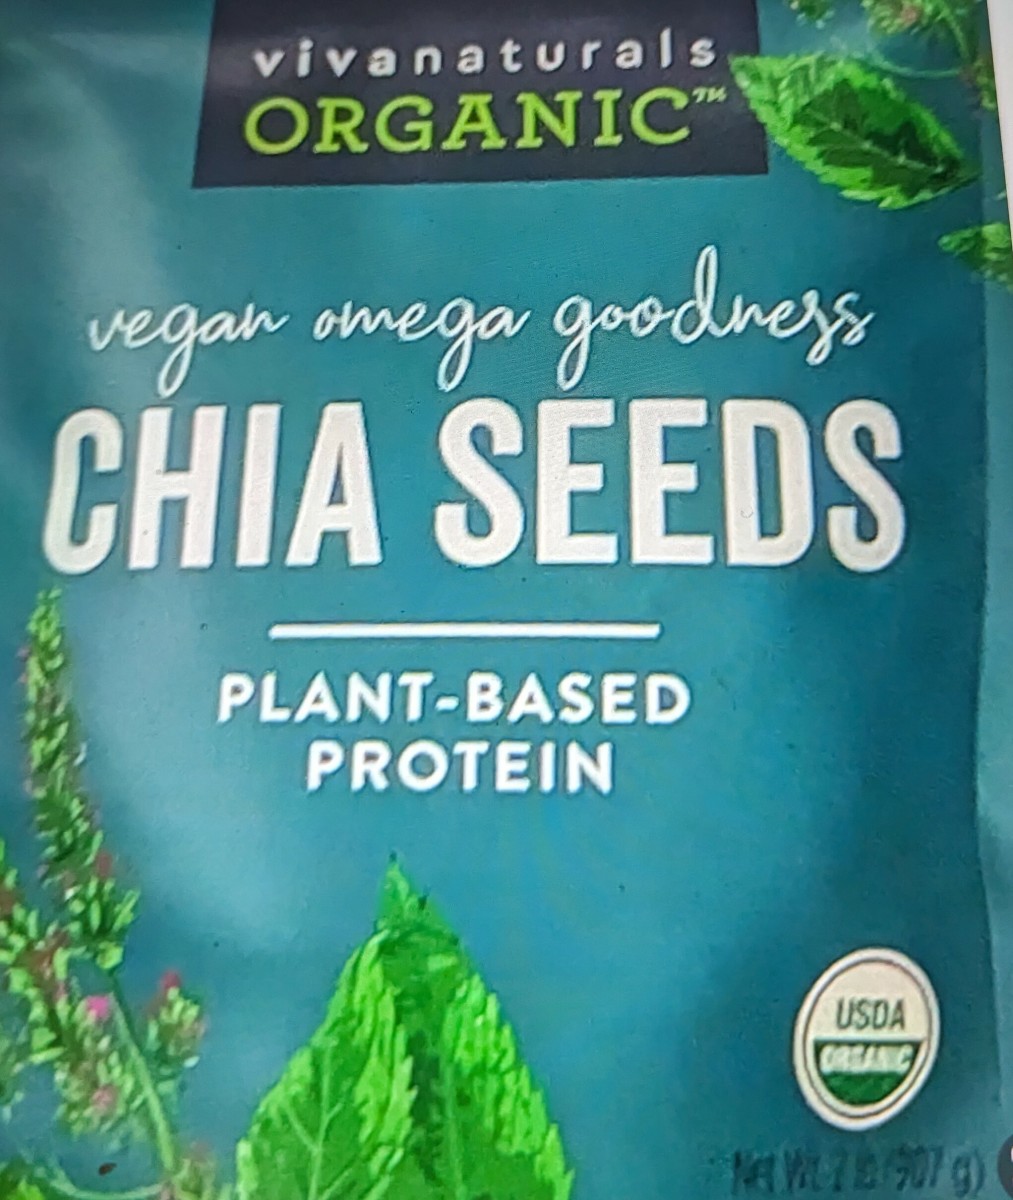 Health- Chia Seeds Are One of Nature’s Super Health Foods